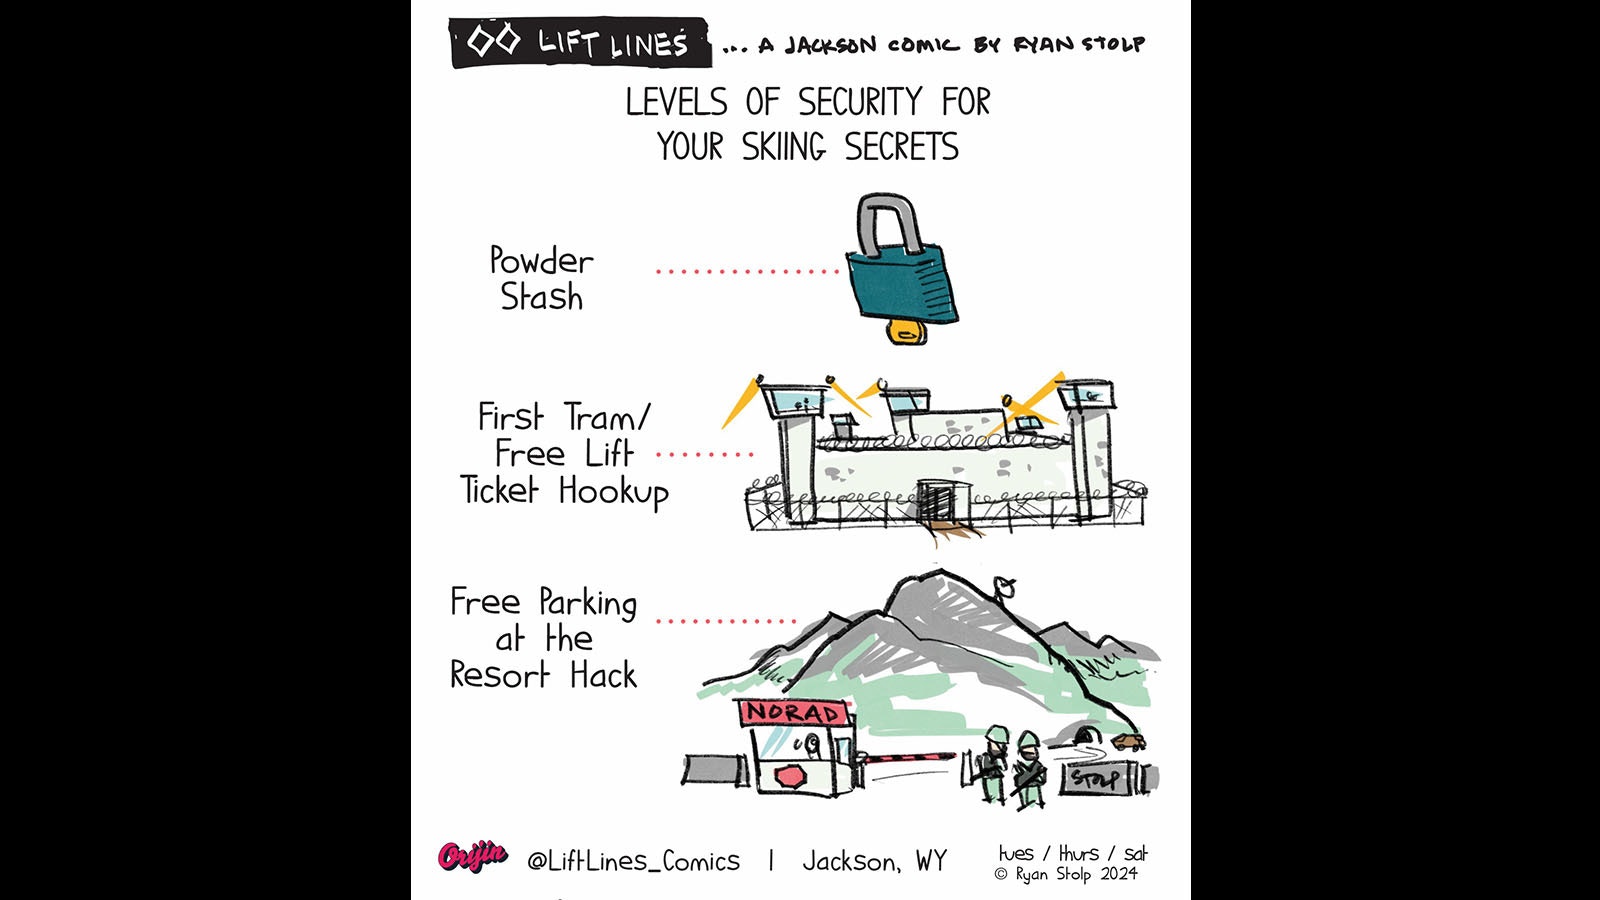 Controversial Lift Lines cartoon, "Levels of Security for Your Skiing Secrets," that shined light on a longtime parking hack Jackson Hole Mountain Resort workers were exploiting.